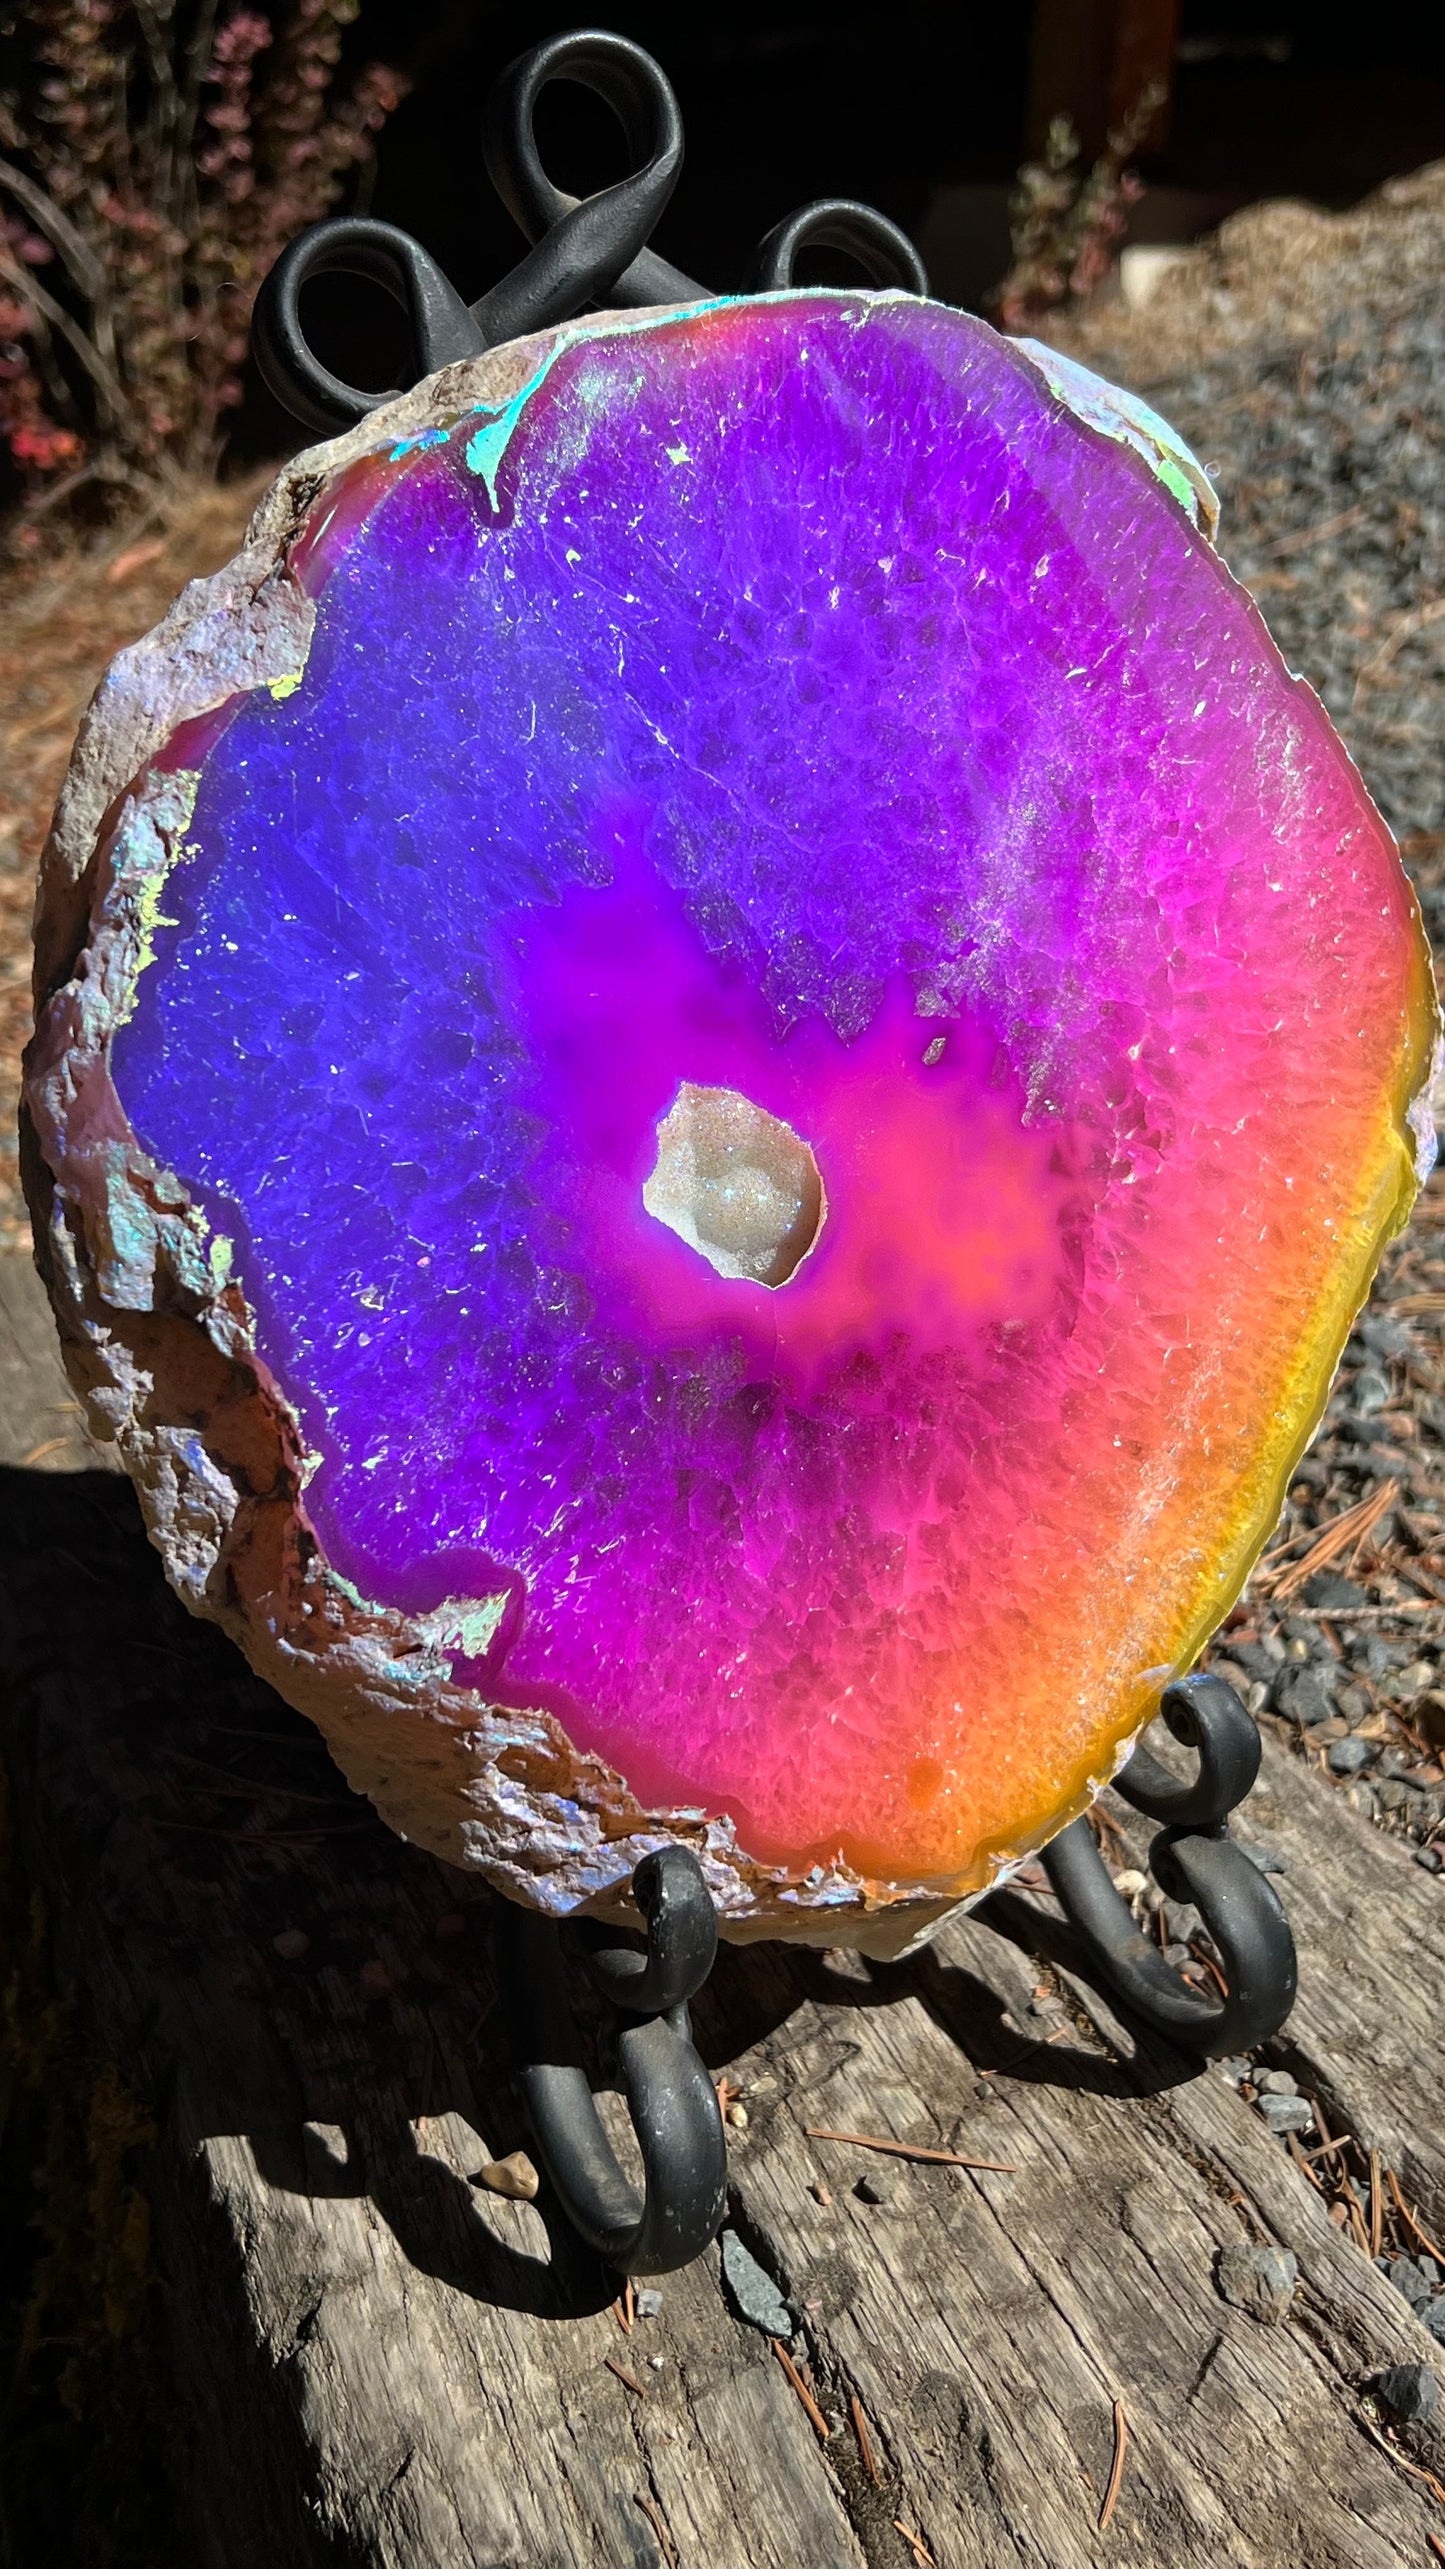 Large Angel Aura Agate Slice with Display Stand